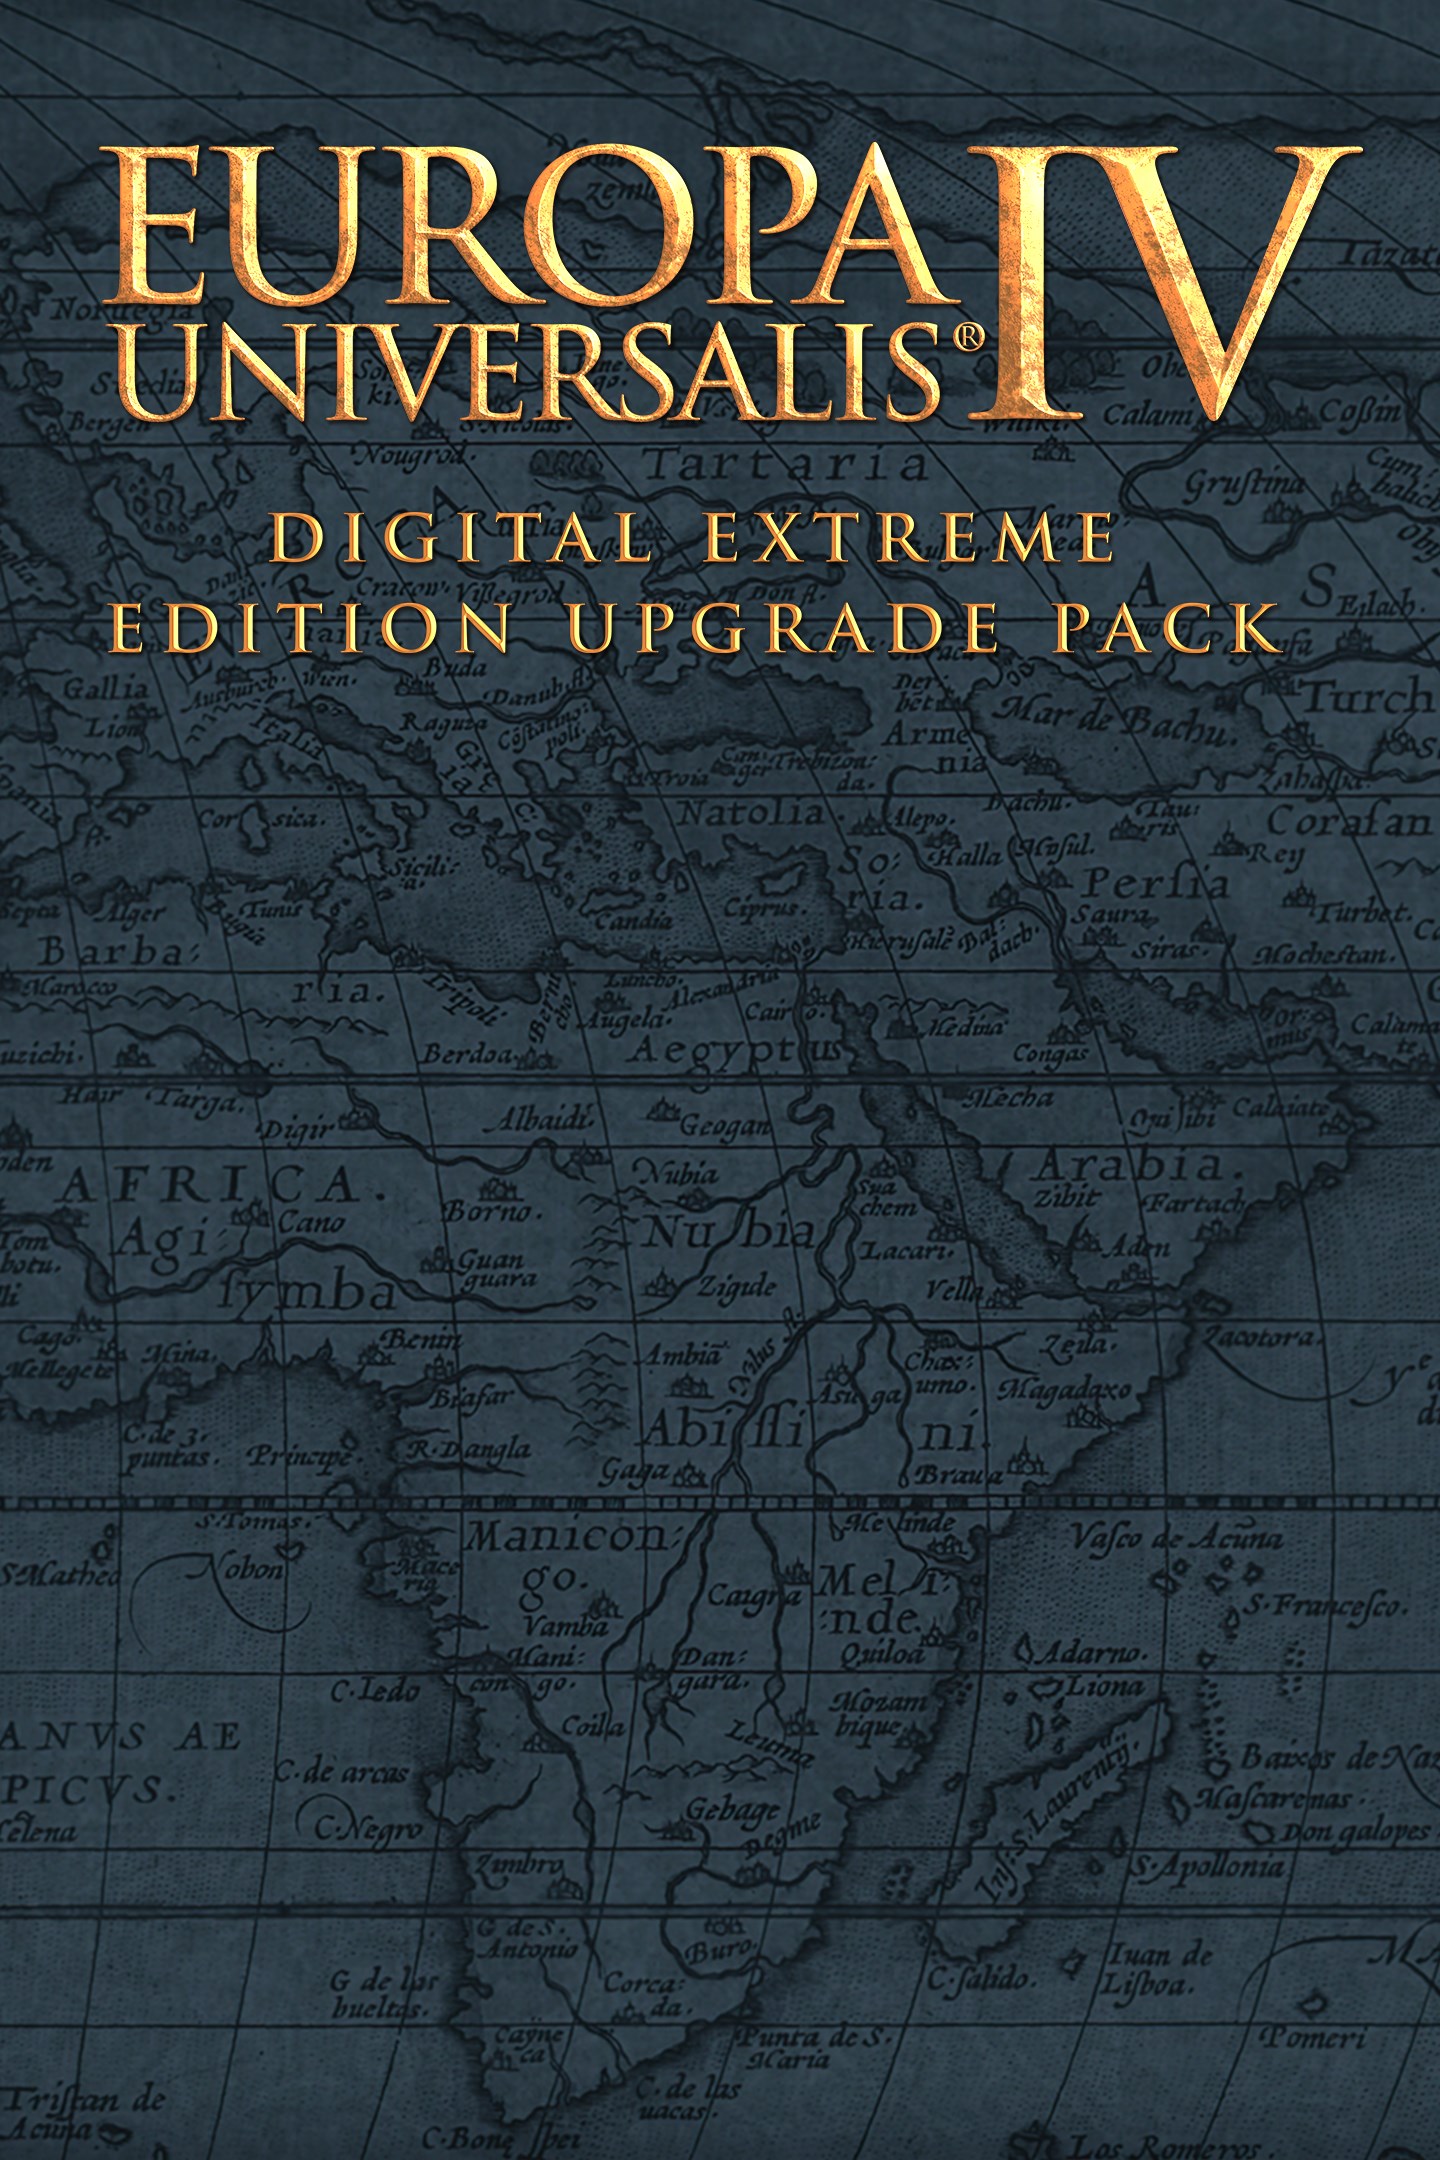 Europa Universalis IV: Digital Extreme Edition Upgrade Pack Download